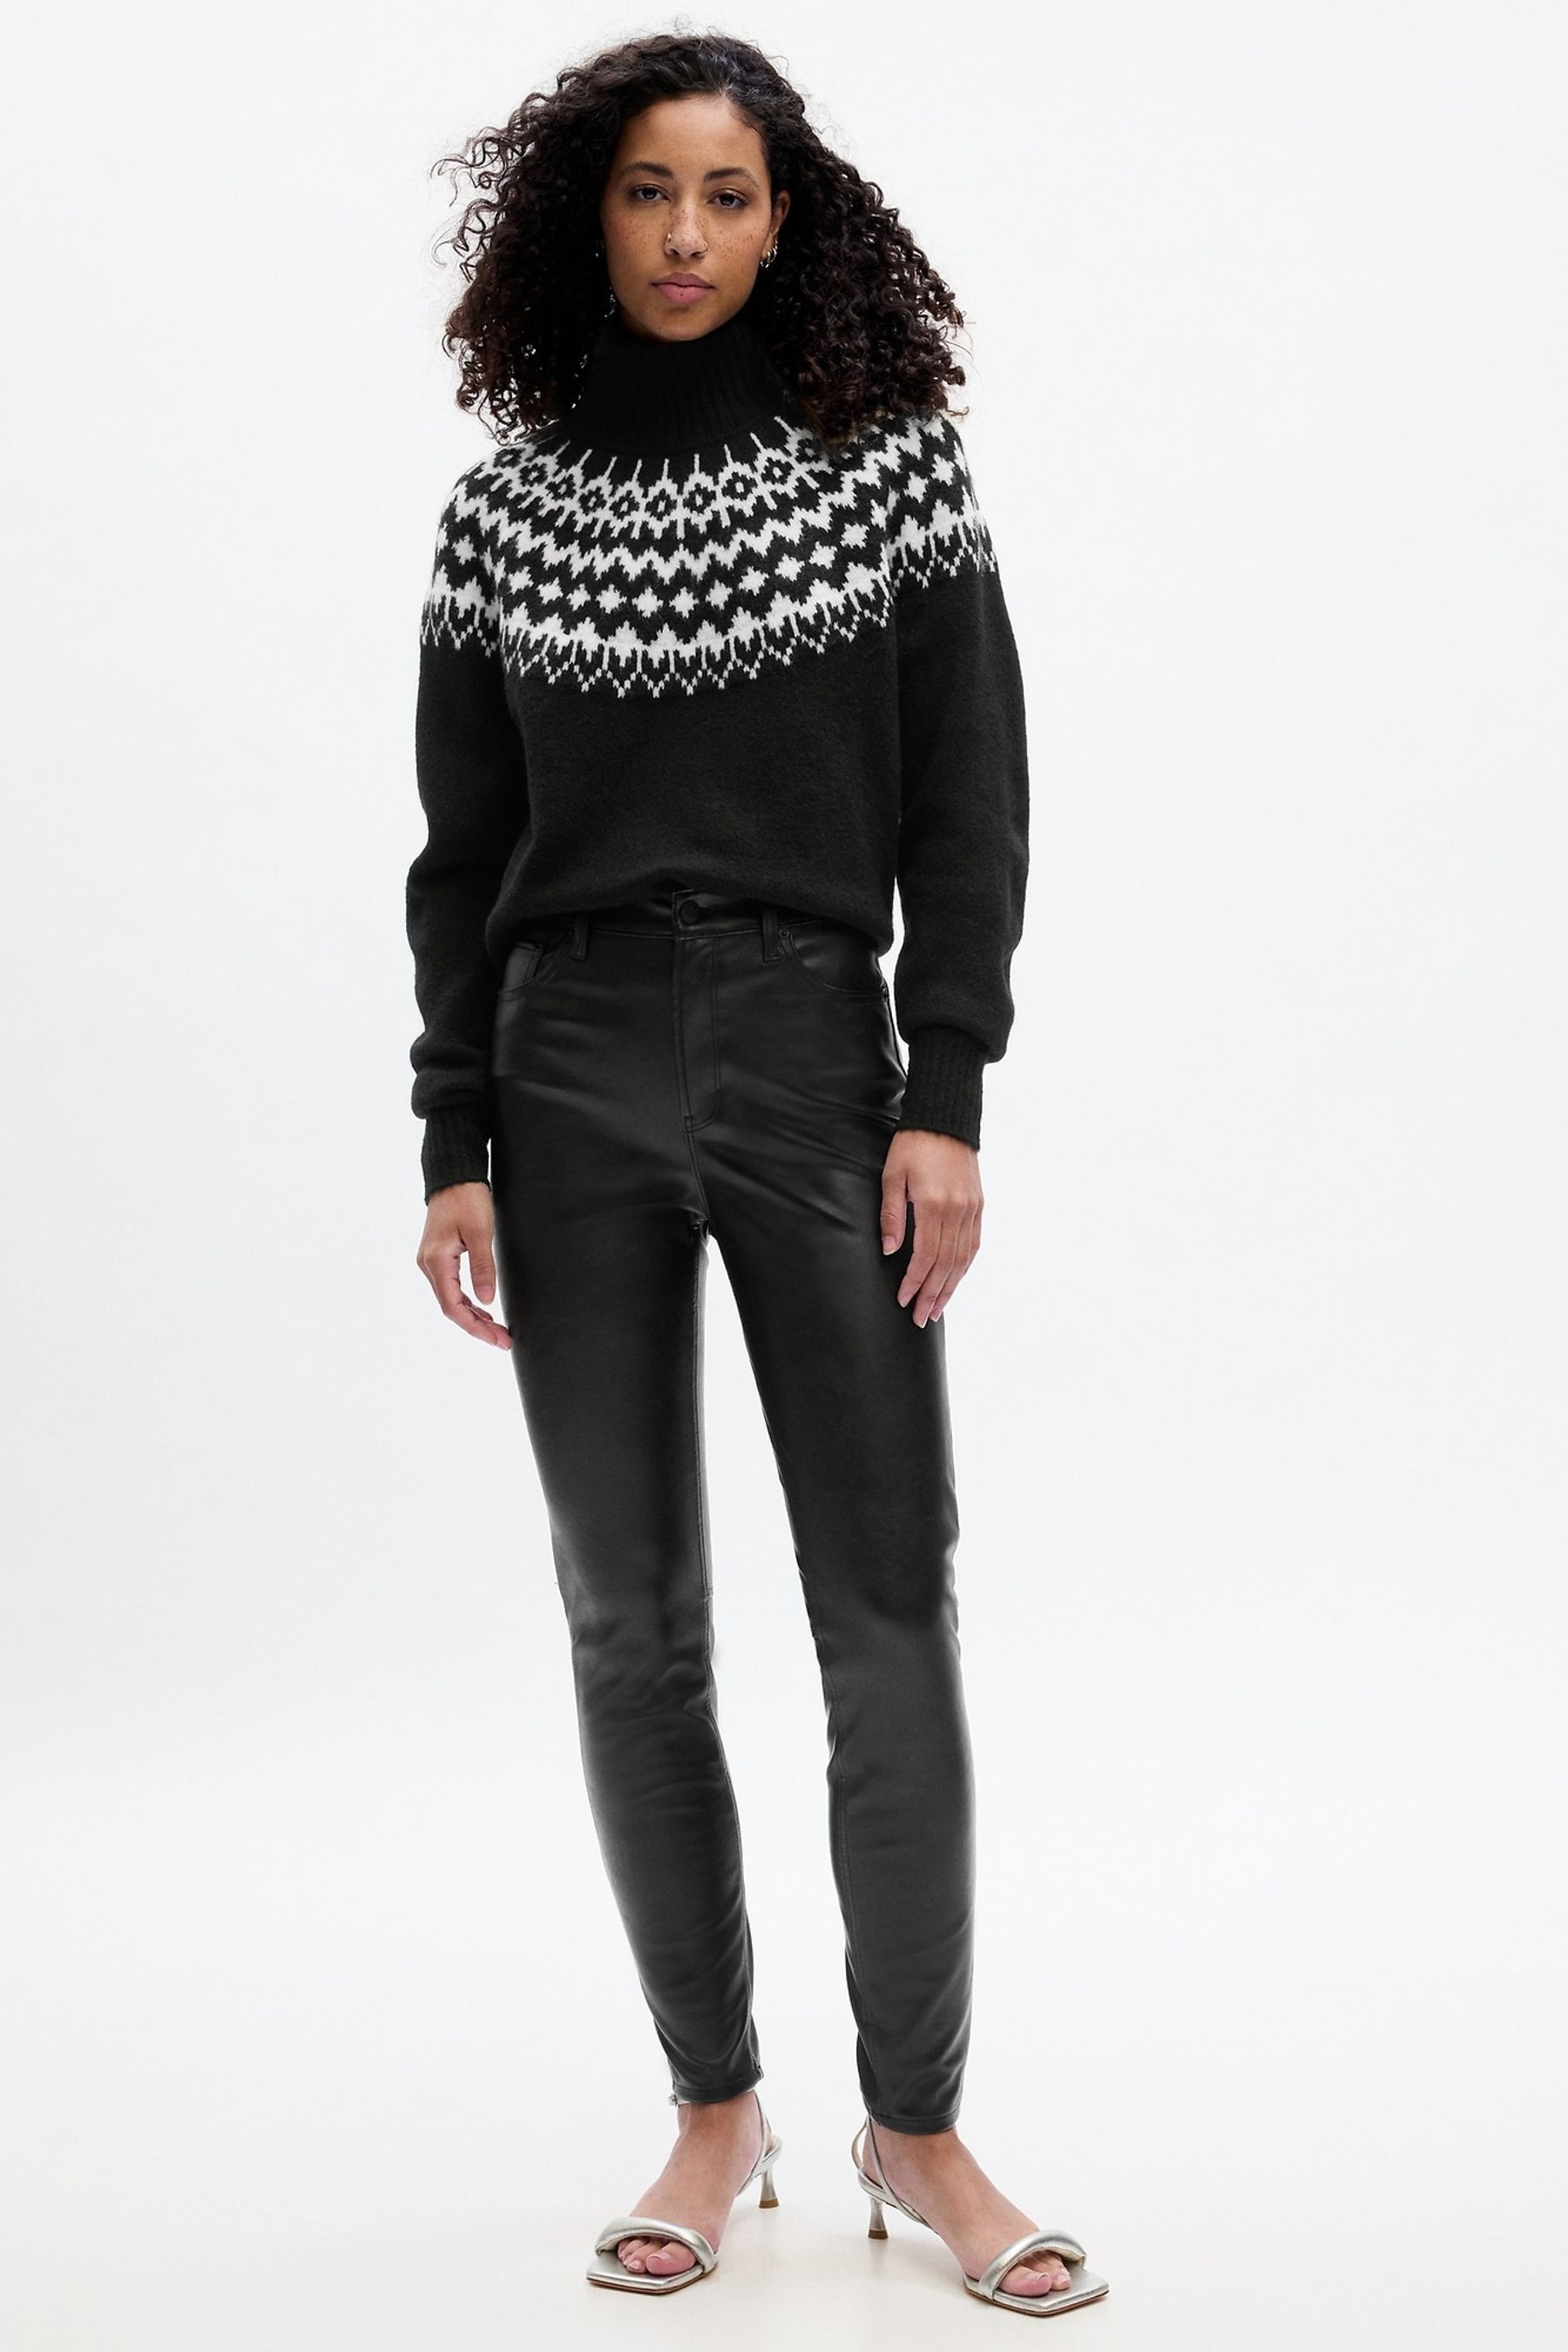 Buy Black Relaxed Forever Cosy Fair Isle Jumper from the Gap online shop